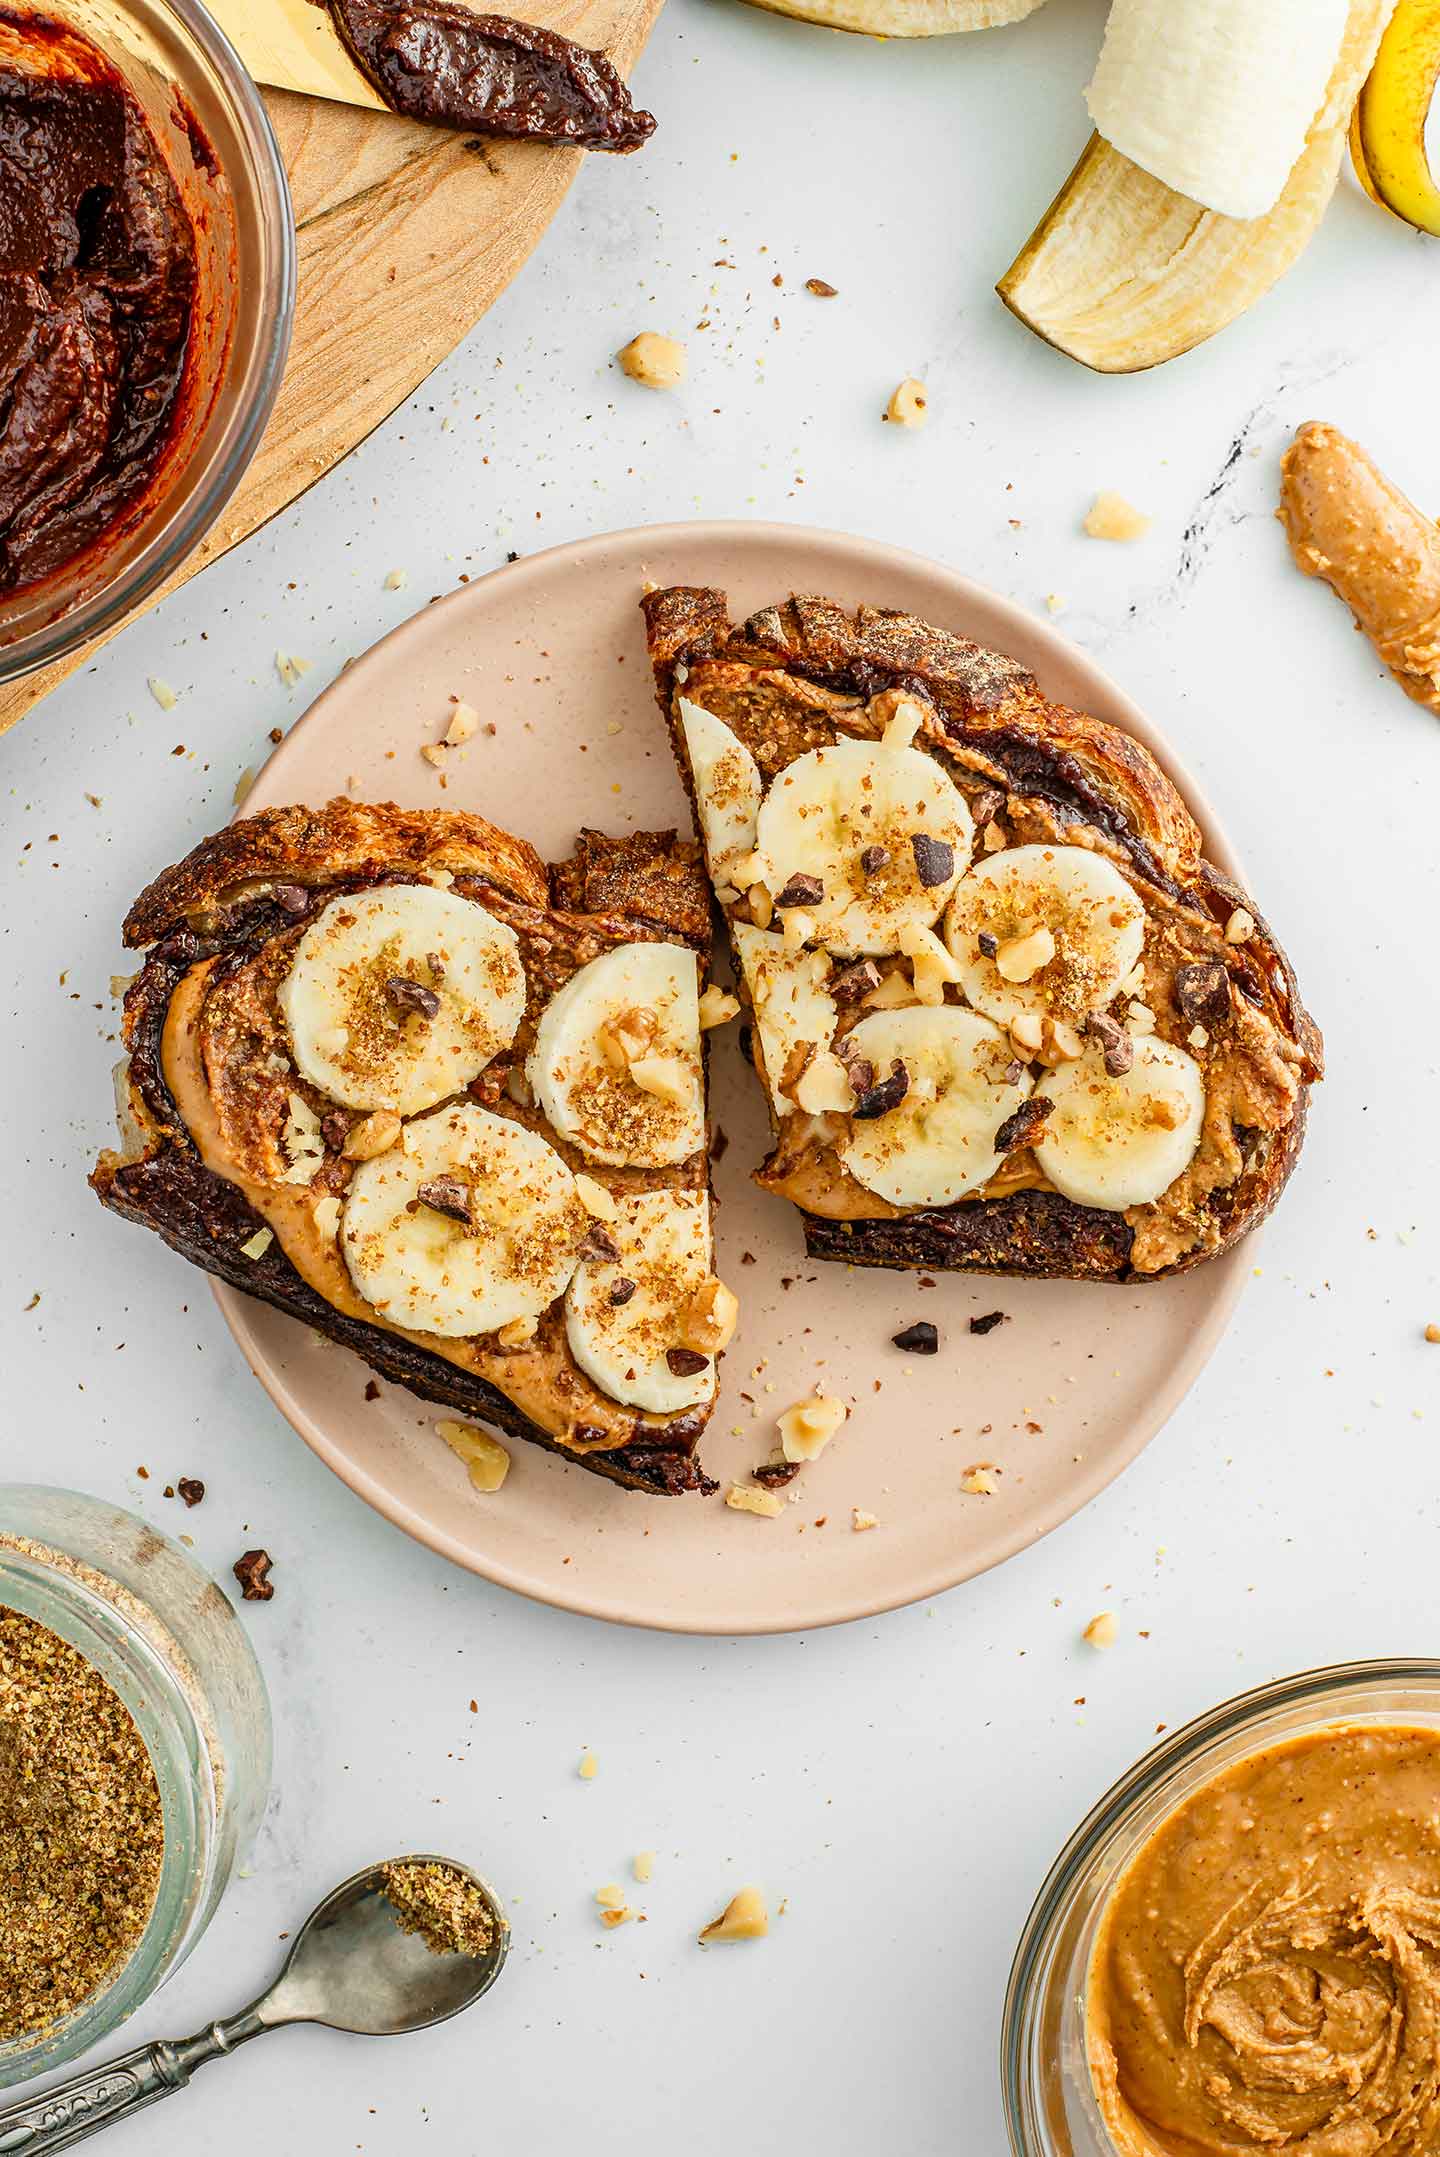 Top down view of an open-faced vegan Nutella sandwich on a plate. It is topped with peanut butter, sliced banana, ground flax seed, cacao nibs, and toasted chopped walnuts. Extra ingredients surround the plate.